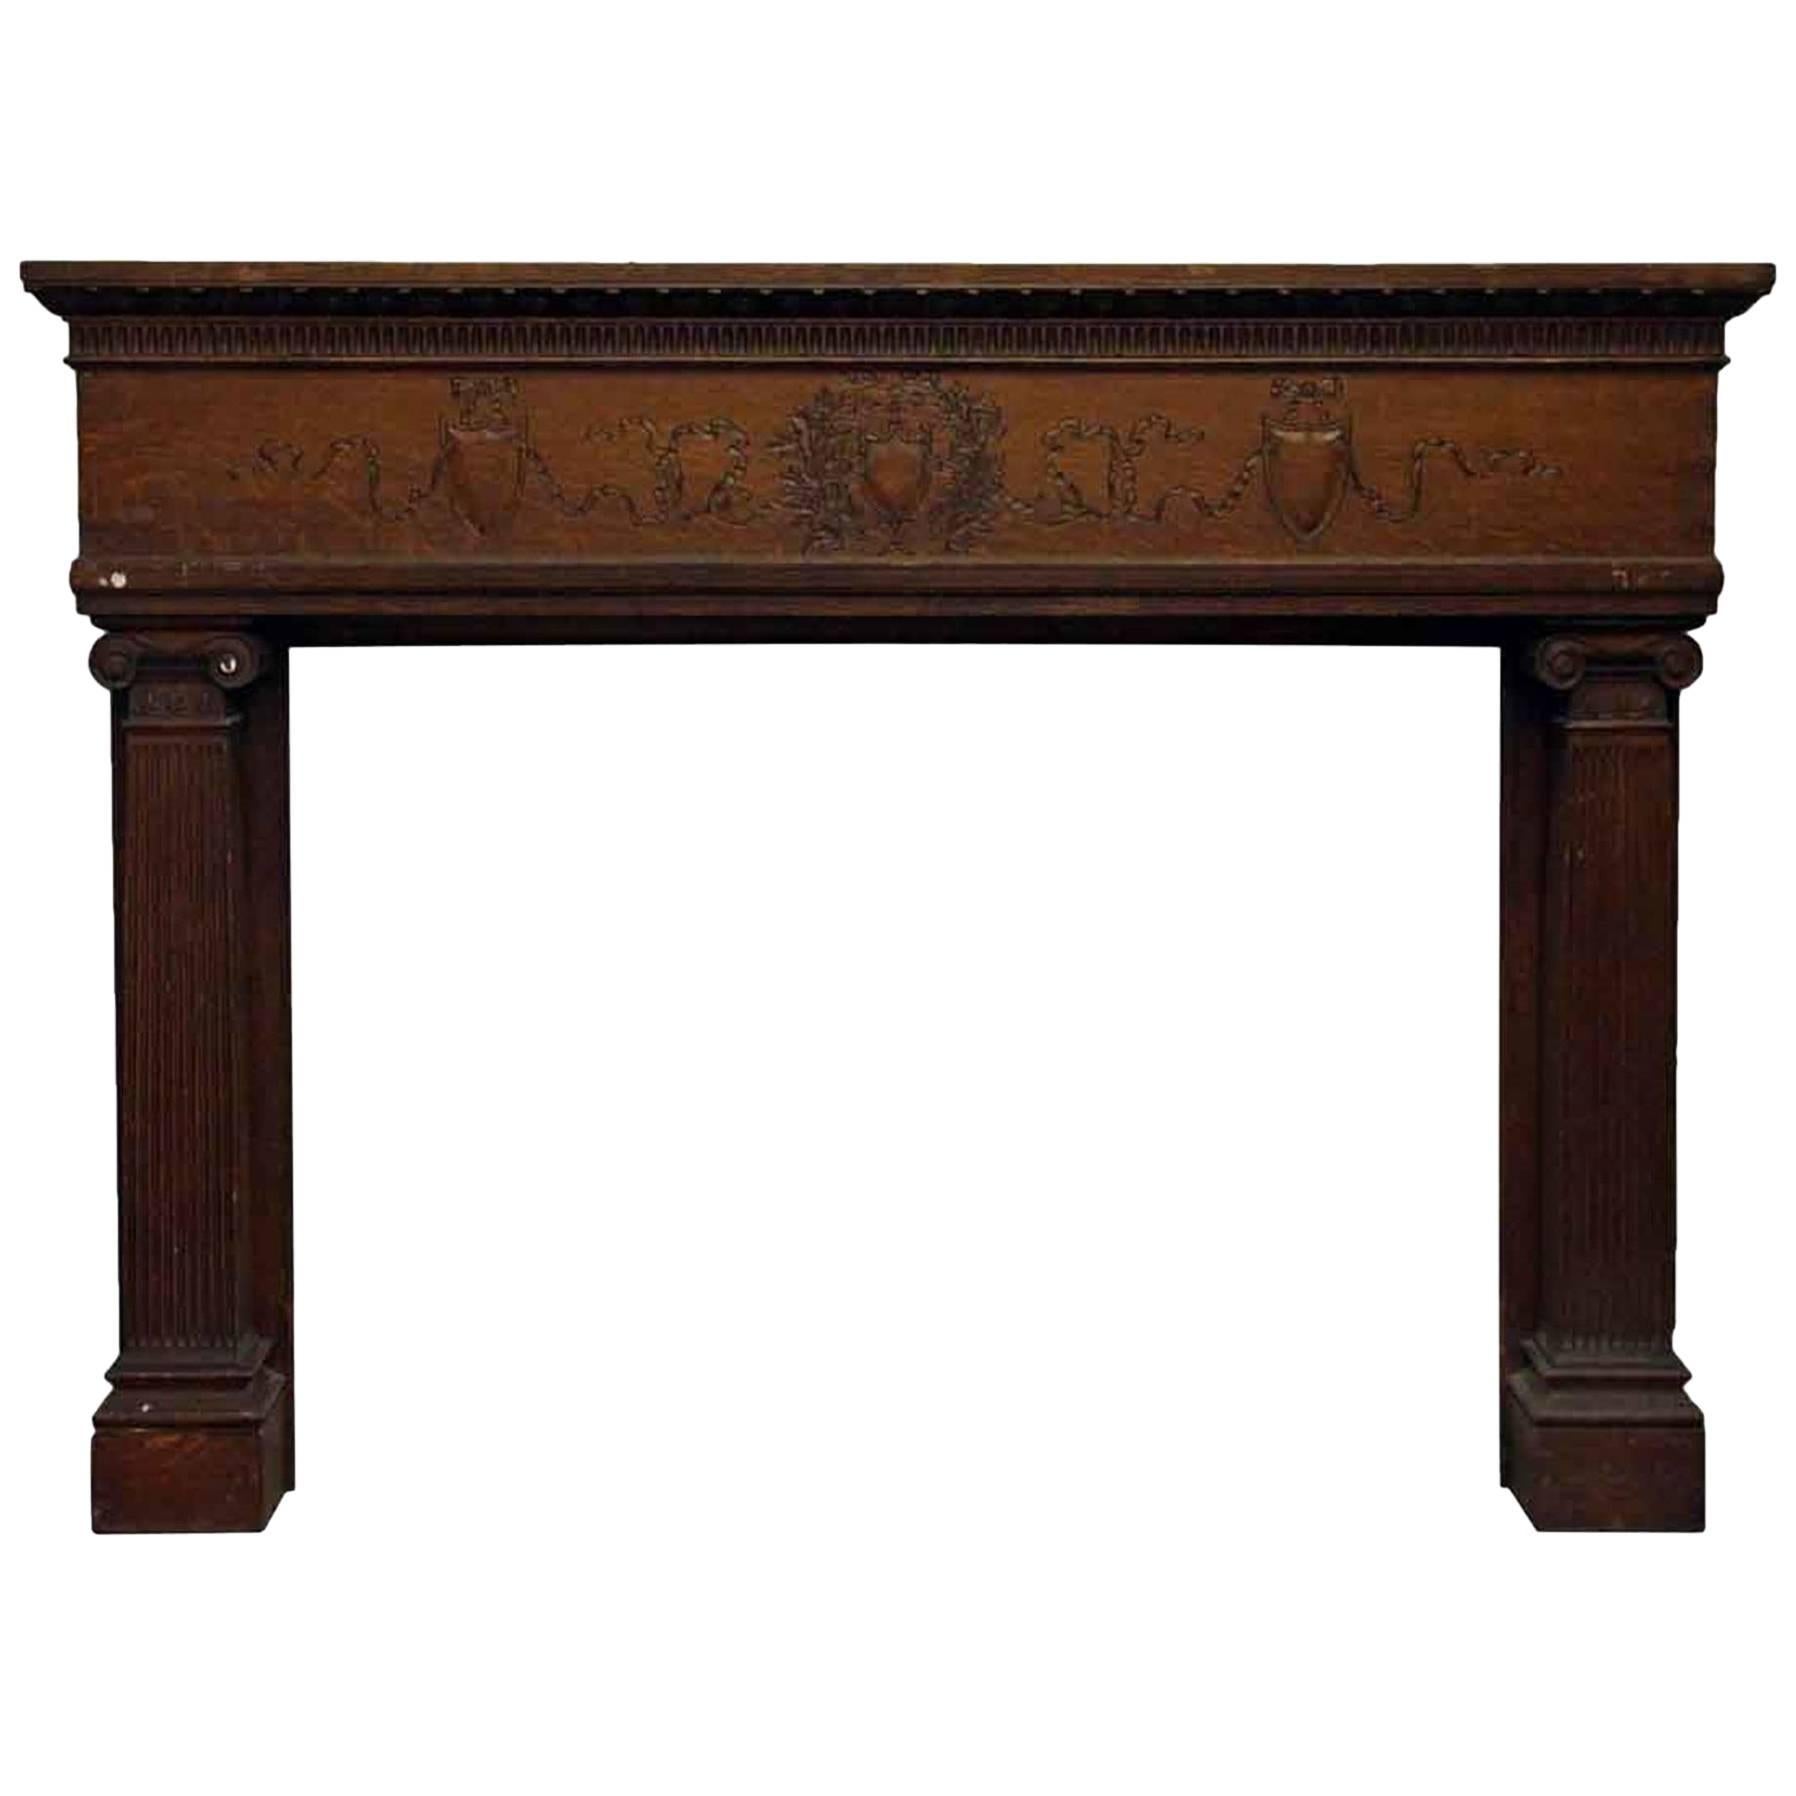 1920s Extra Wide Carved Oak Mantel with Hand-Carved Details